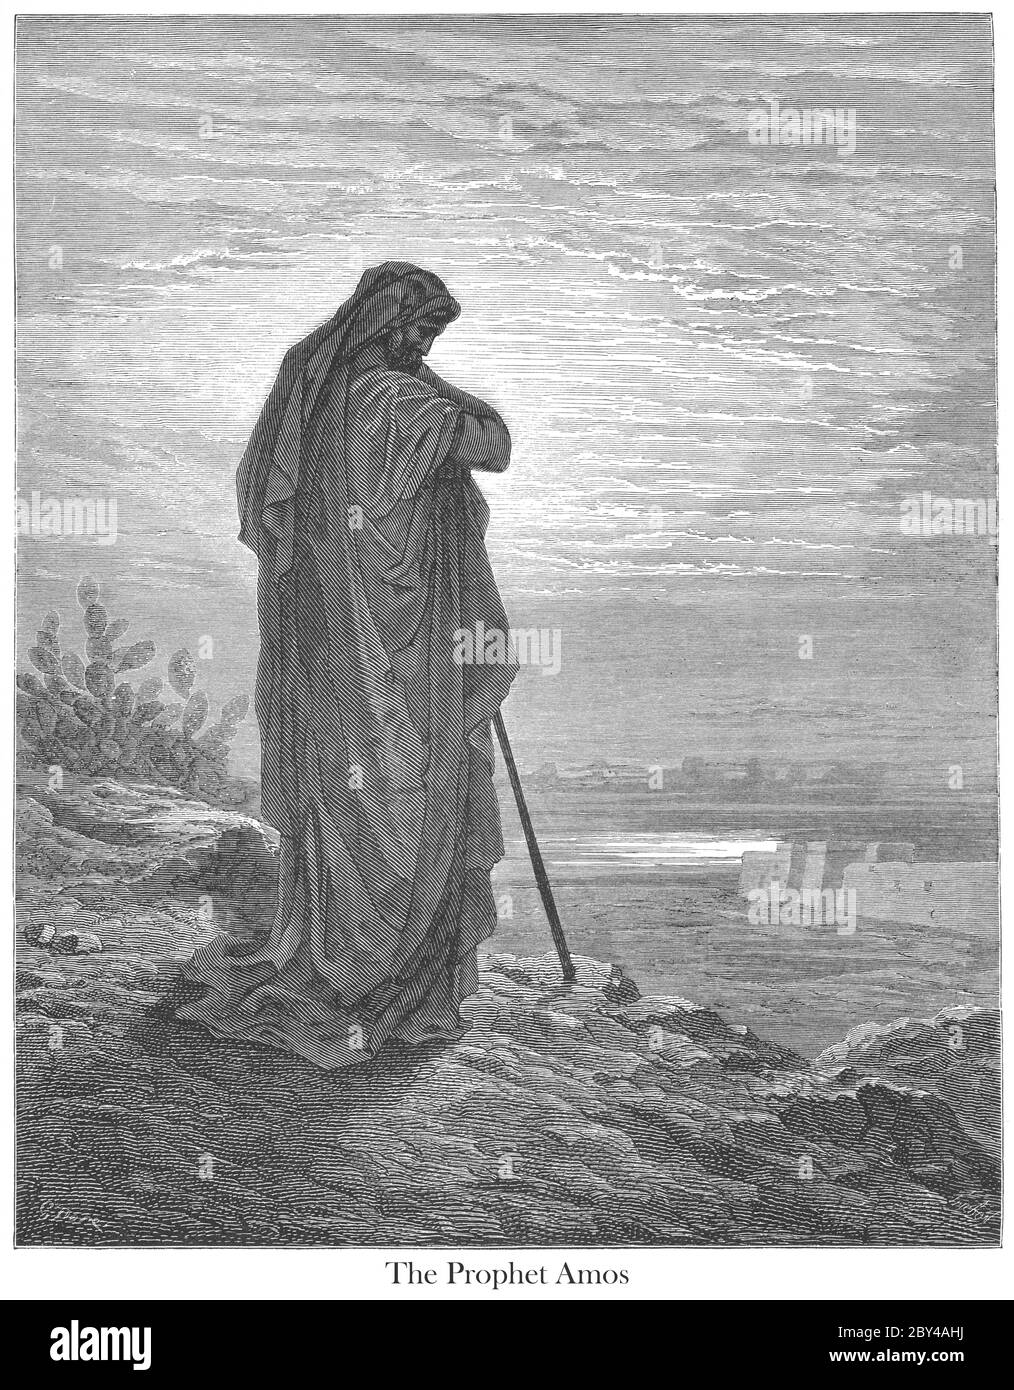 The Prophet Amos Amos 1:1 From the book 'Bible Gallery' Illustrated by Gustave Dore with Memoir of Dore and Descriptive Letter-press by Talbot W. Chambers D.D. Published by Cassell & Company Limited in London and simultaneously by Mame in Tours, France in 1866 Stock Photo